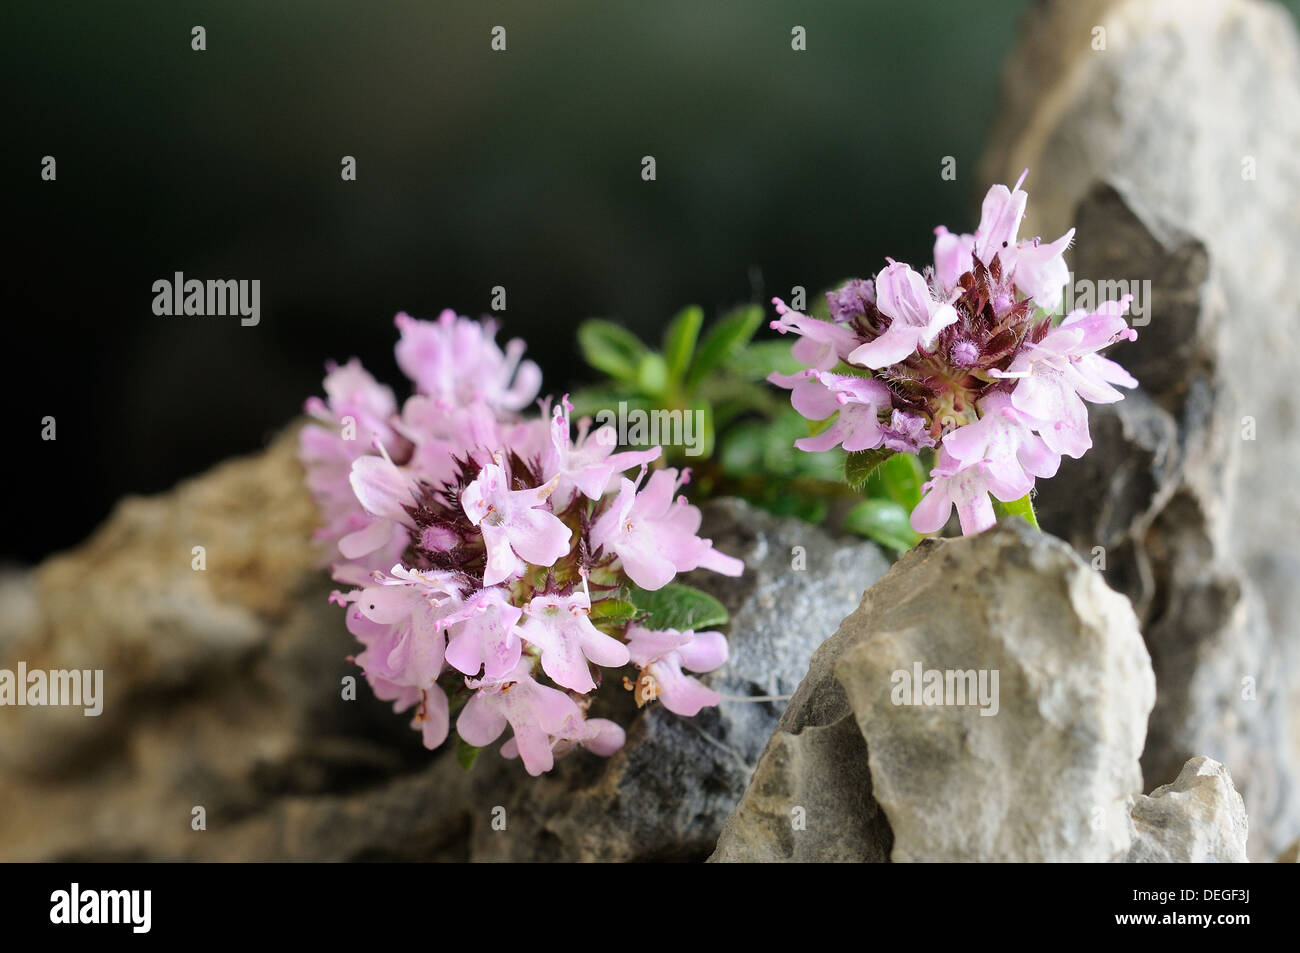 Horizontal portrait of thyme, Thymus praecox, flowers with out focus background. Stock Photo